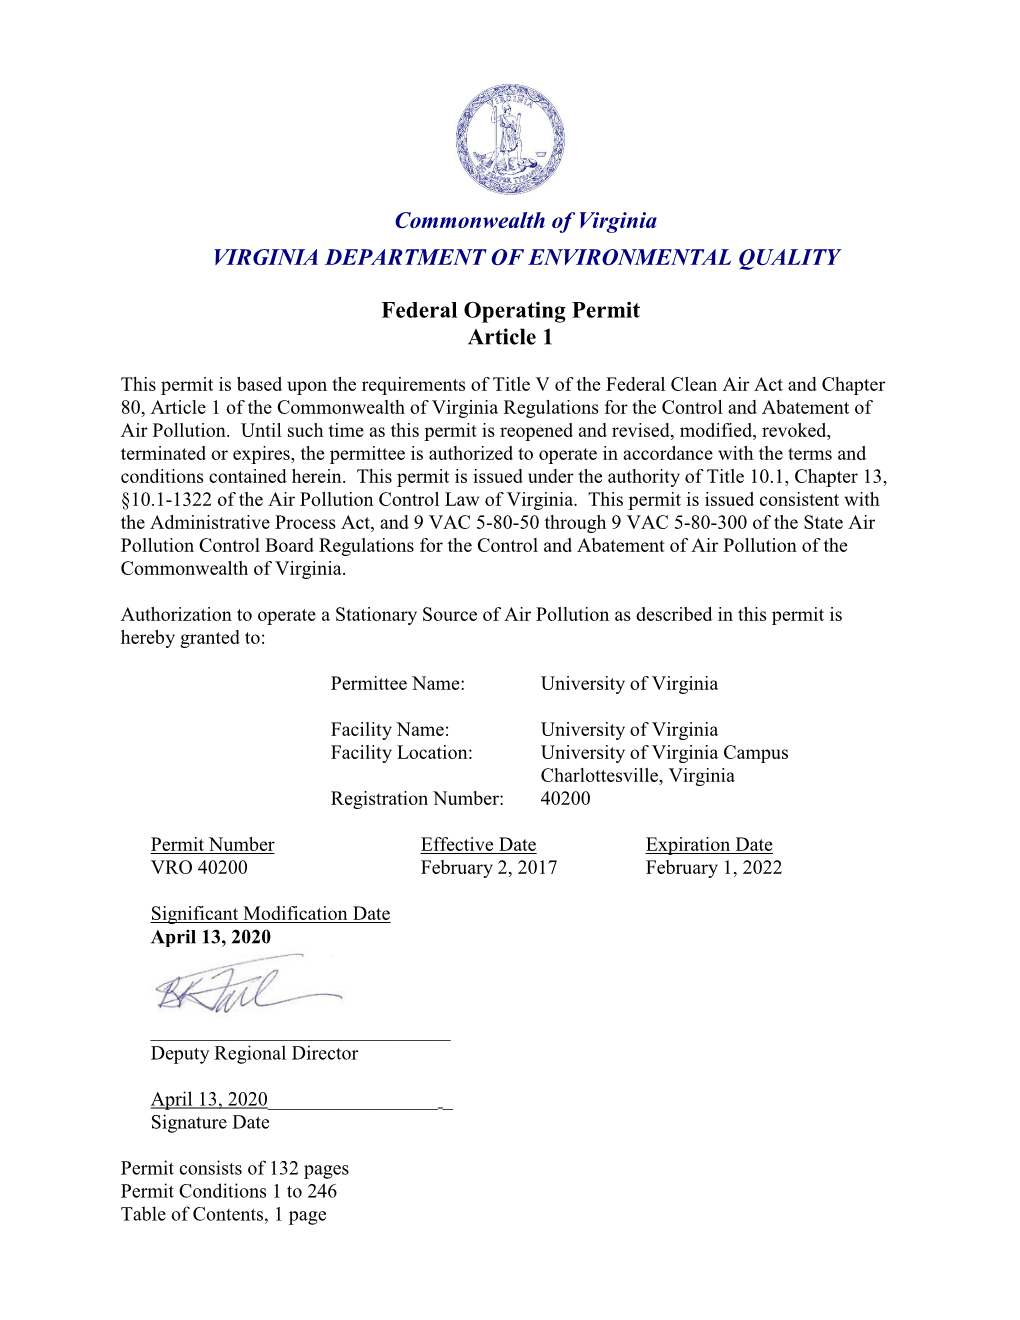 Federal Operating Permit Article 1